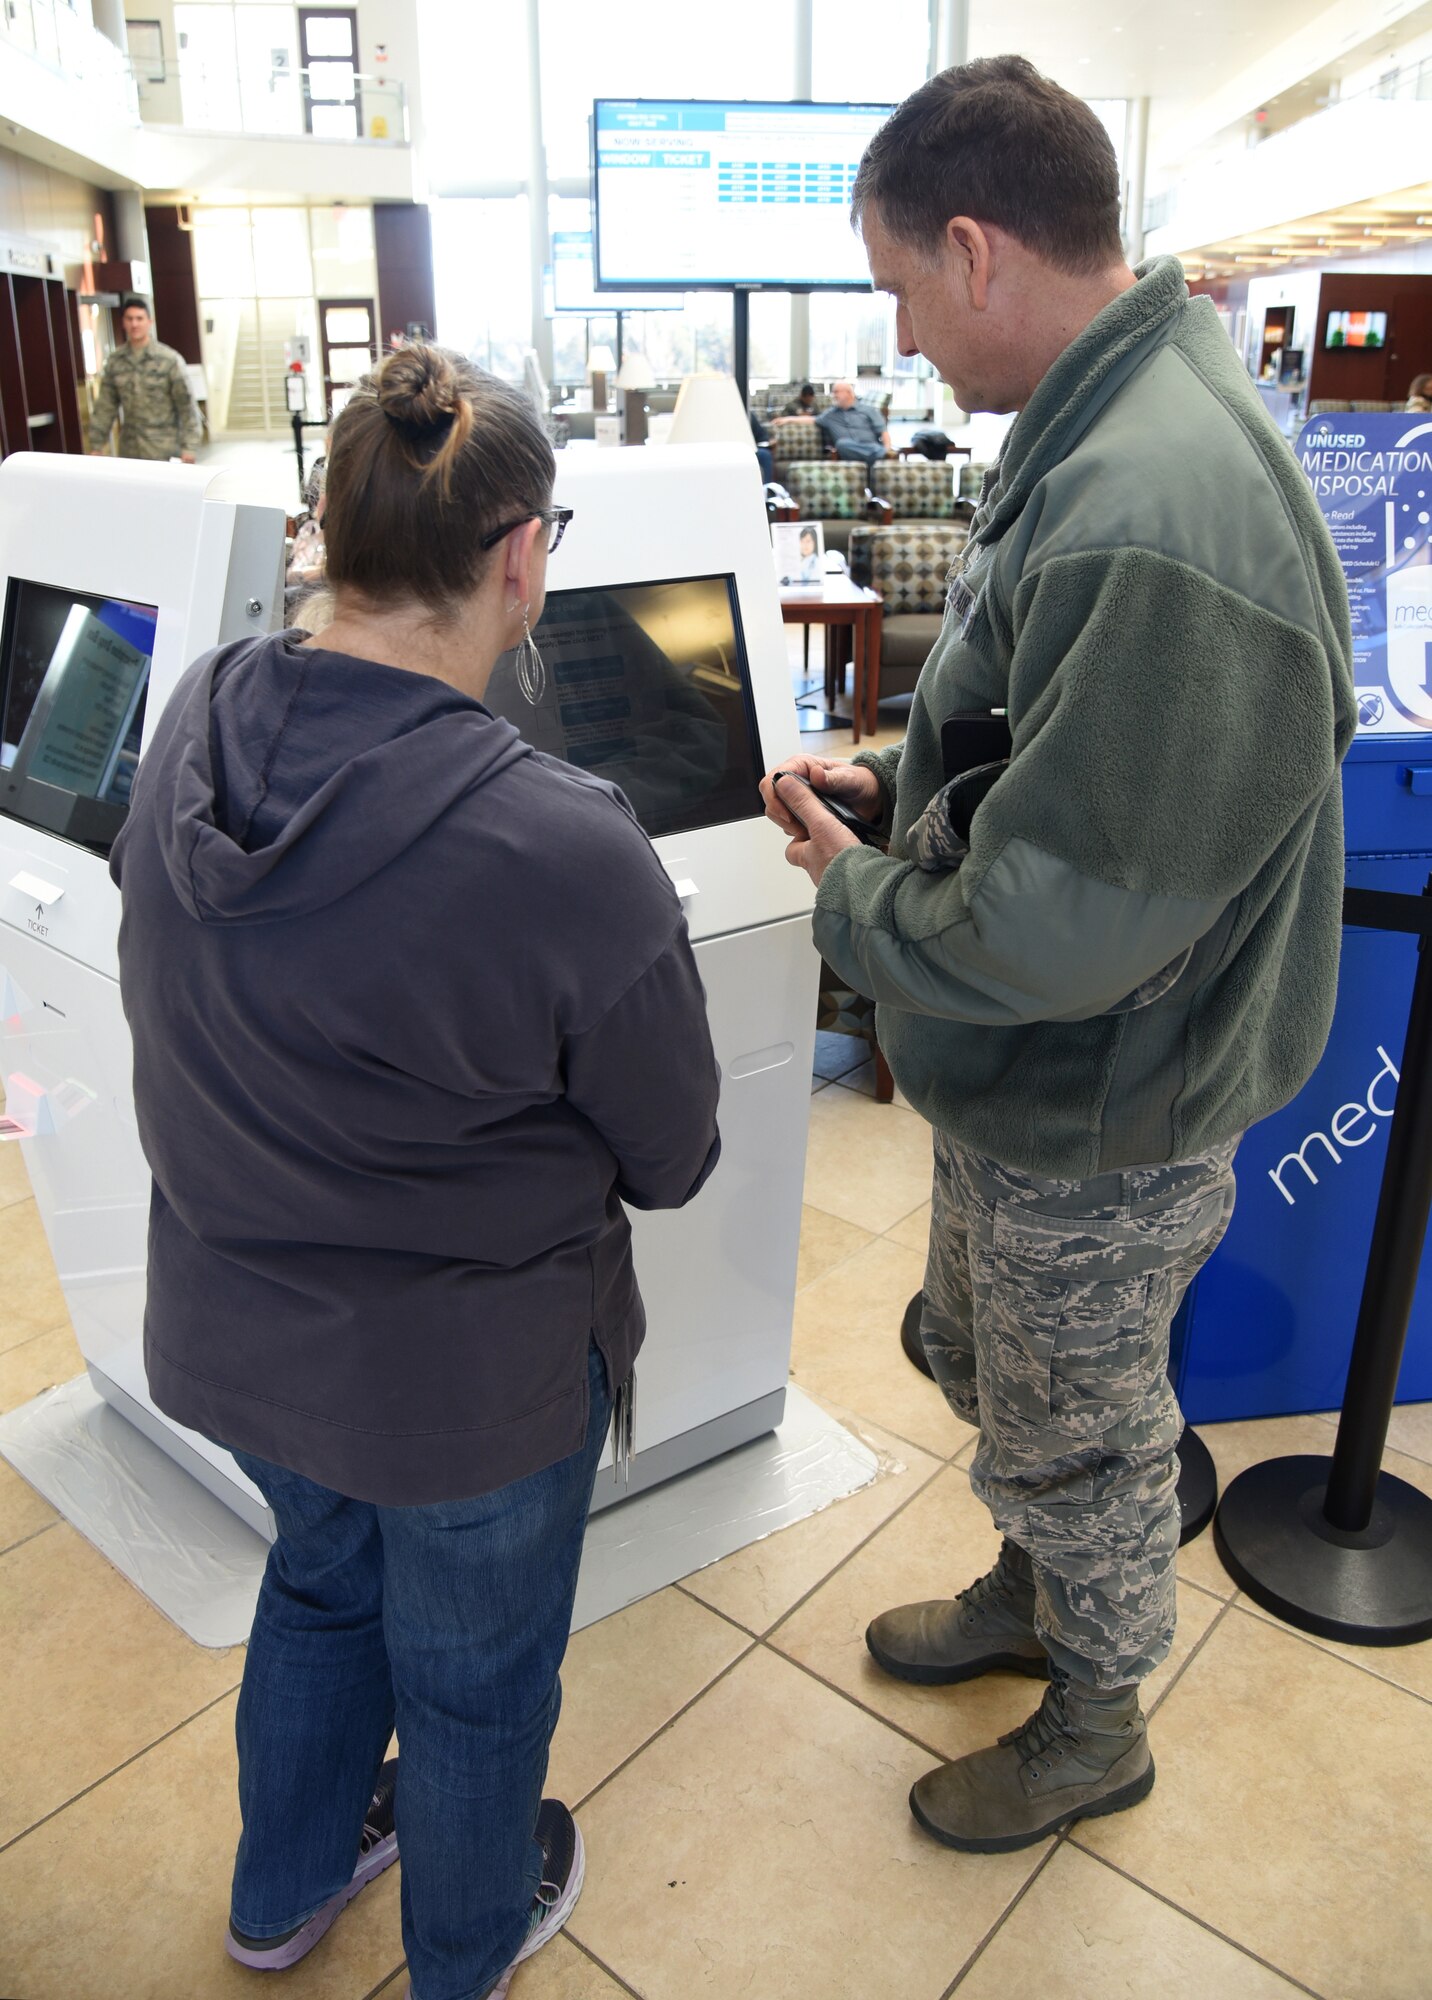 Teresa Larios, pharmacy technician with the 72nd Medical Support Squadron, assists Col. Cliff Altizer, Air Force Sustainment Center Inspector General’s Office, with the new Q-Flow machines inside the lobby of the 72nd Medical Group. The Q-Flow kiosks allow pharmacy customers to check-in to pick up their prescriptions and will show them on the large screens in the waiting area what their wait time is. (U.S. Air Force photo/Kelly White)